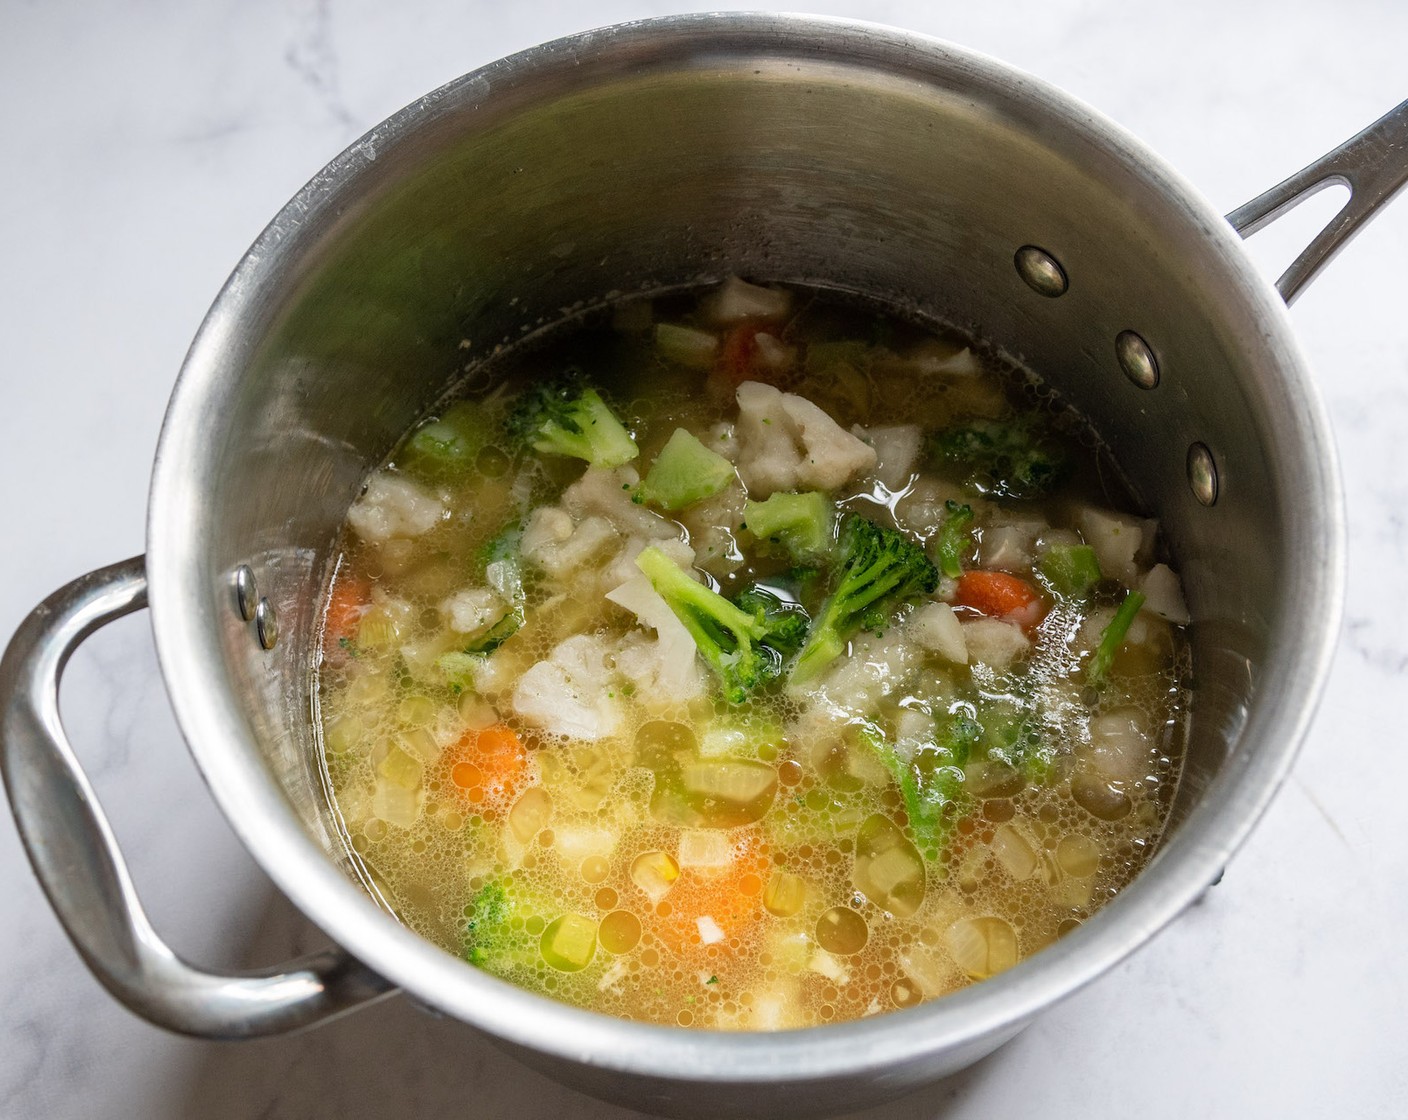 step 2 Add the Chicken Broth (3 cups), Frozen Mixed Vegetables (2 1/4 cups), Red Potatoes (1 1/2 cups), Salt (1/2 tsp), Ground Black Pepper (1/4 tsp), and Onion Powder (1/4 tsp). Raise the heat to medium-high and bring it to a boil.